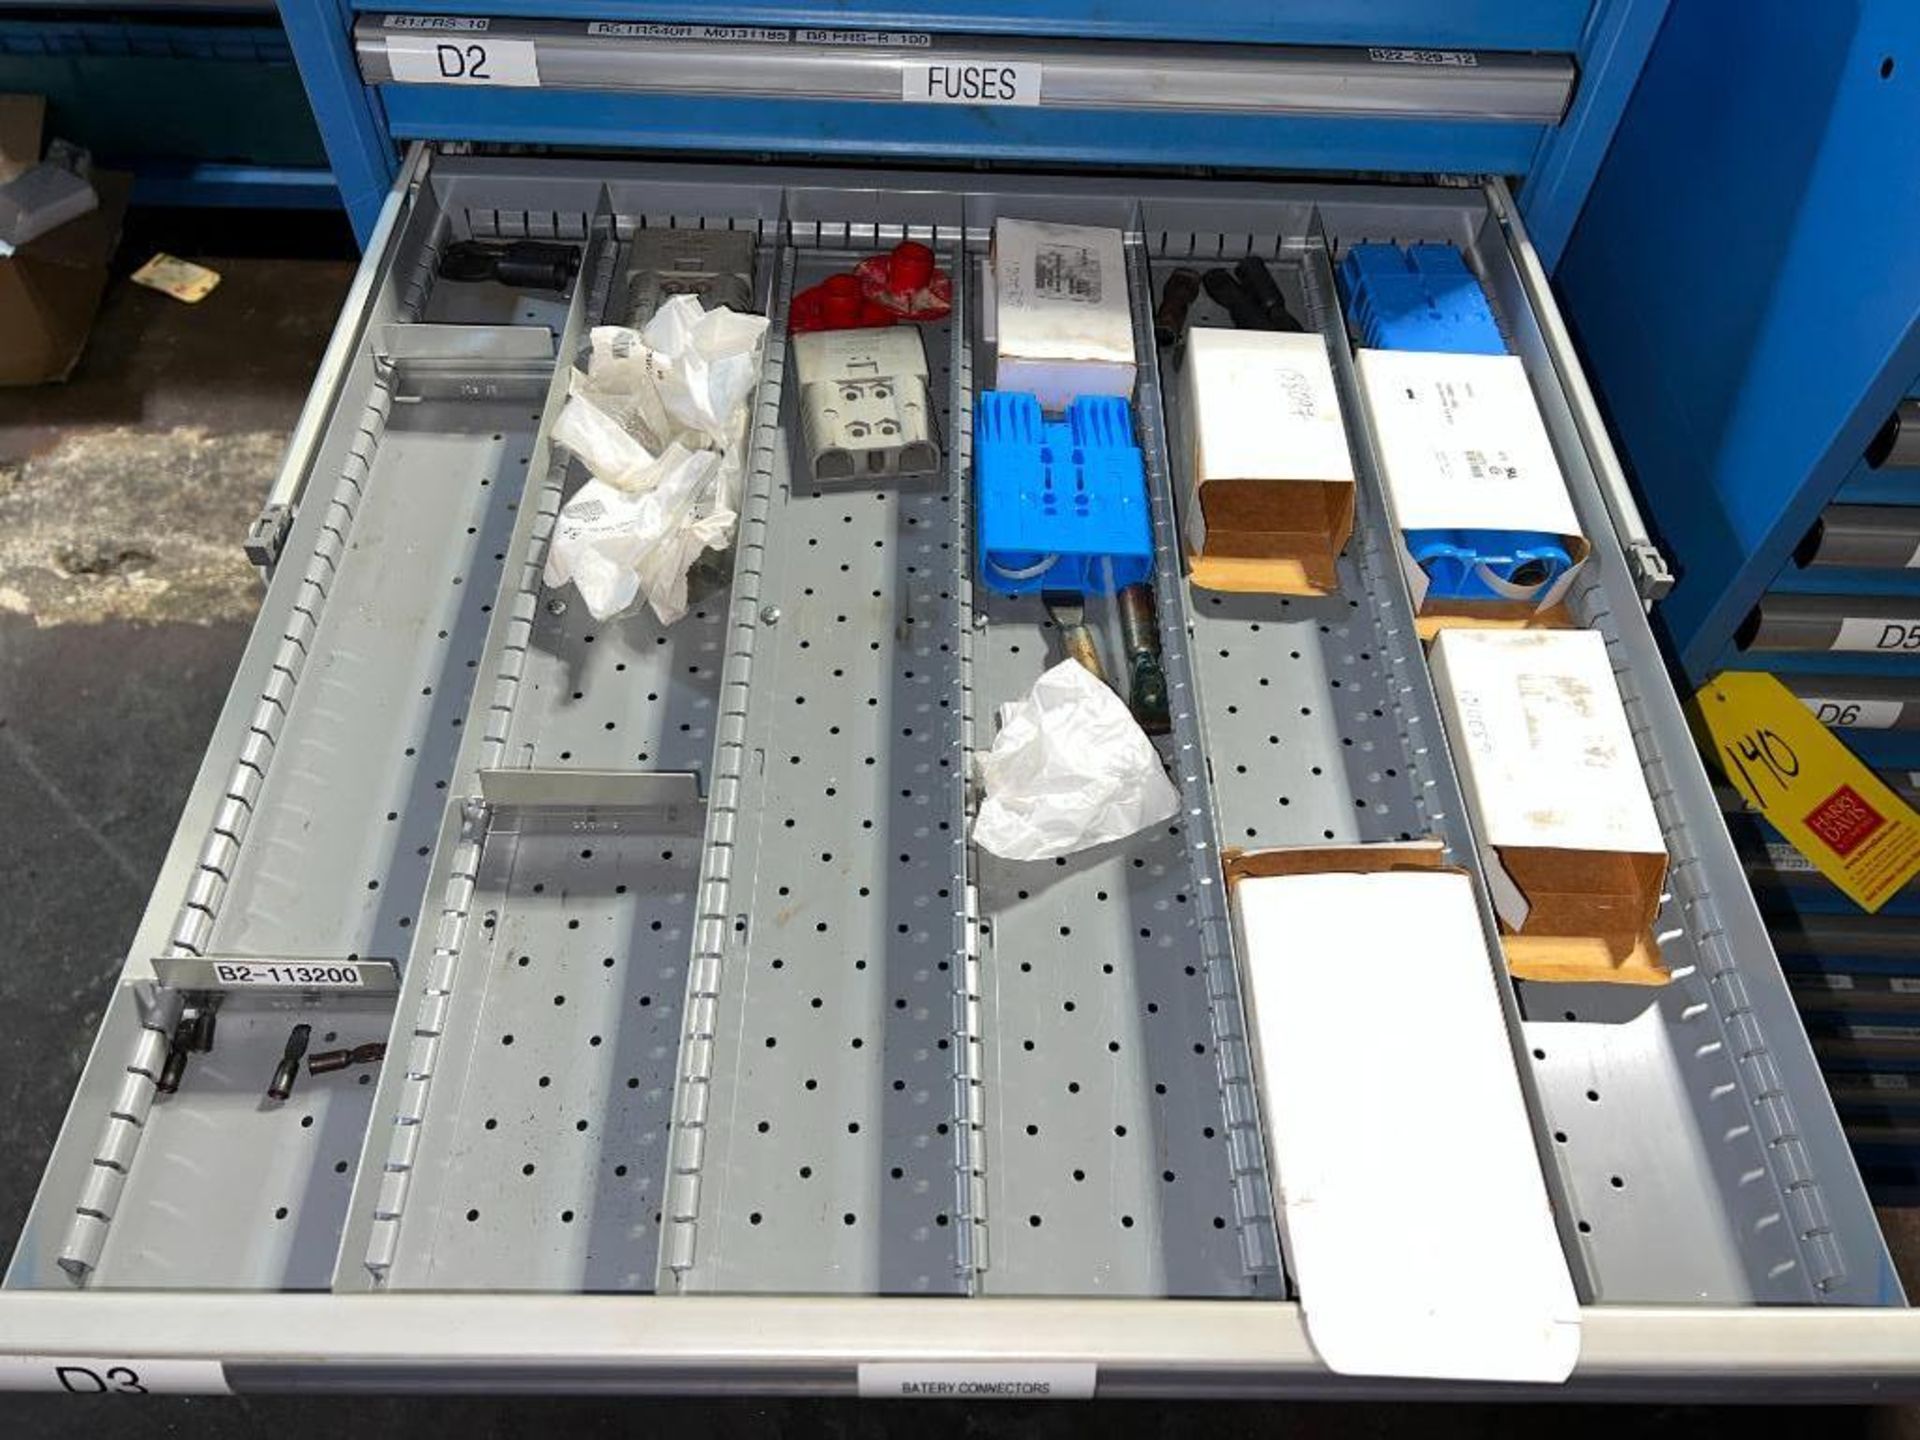 Fuses, Siemens Switches, OMRON Relays, Siemens Pump Parts and Lita 9-Drawer Cabinet (Subject to Conf - Image 4 of 8